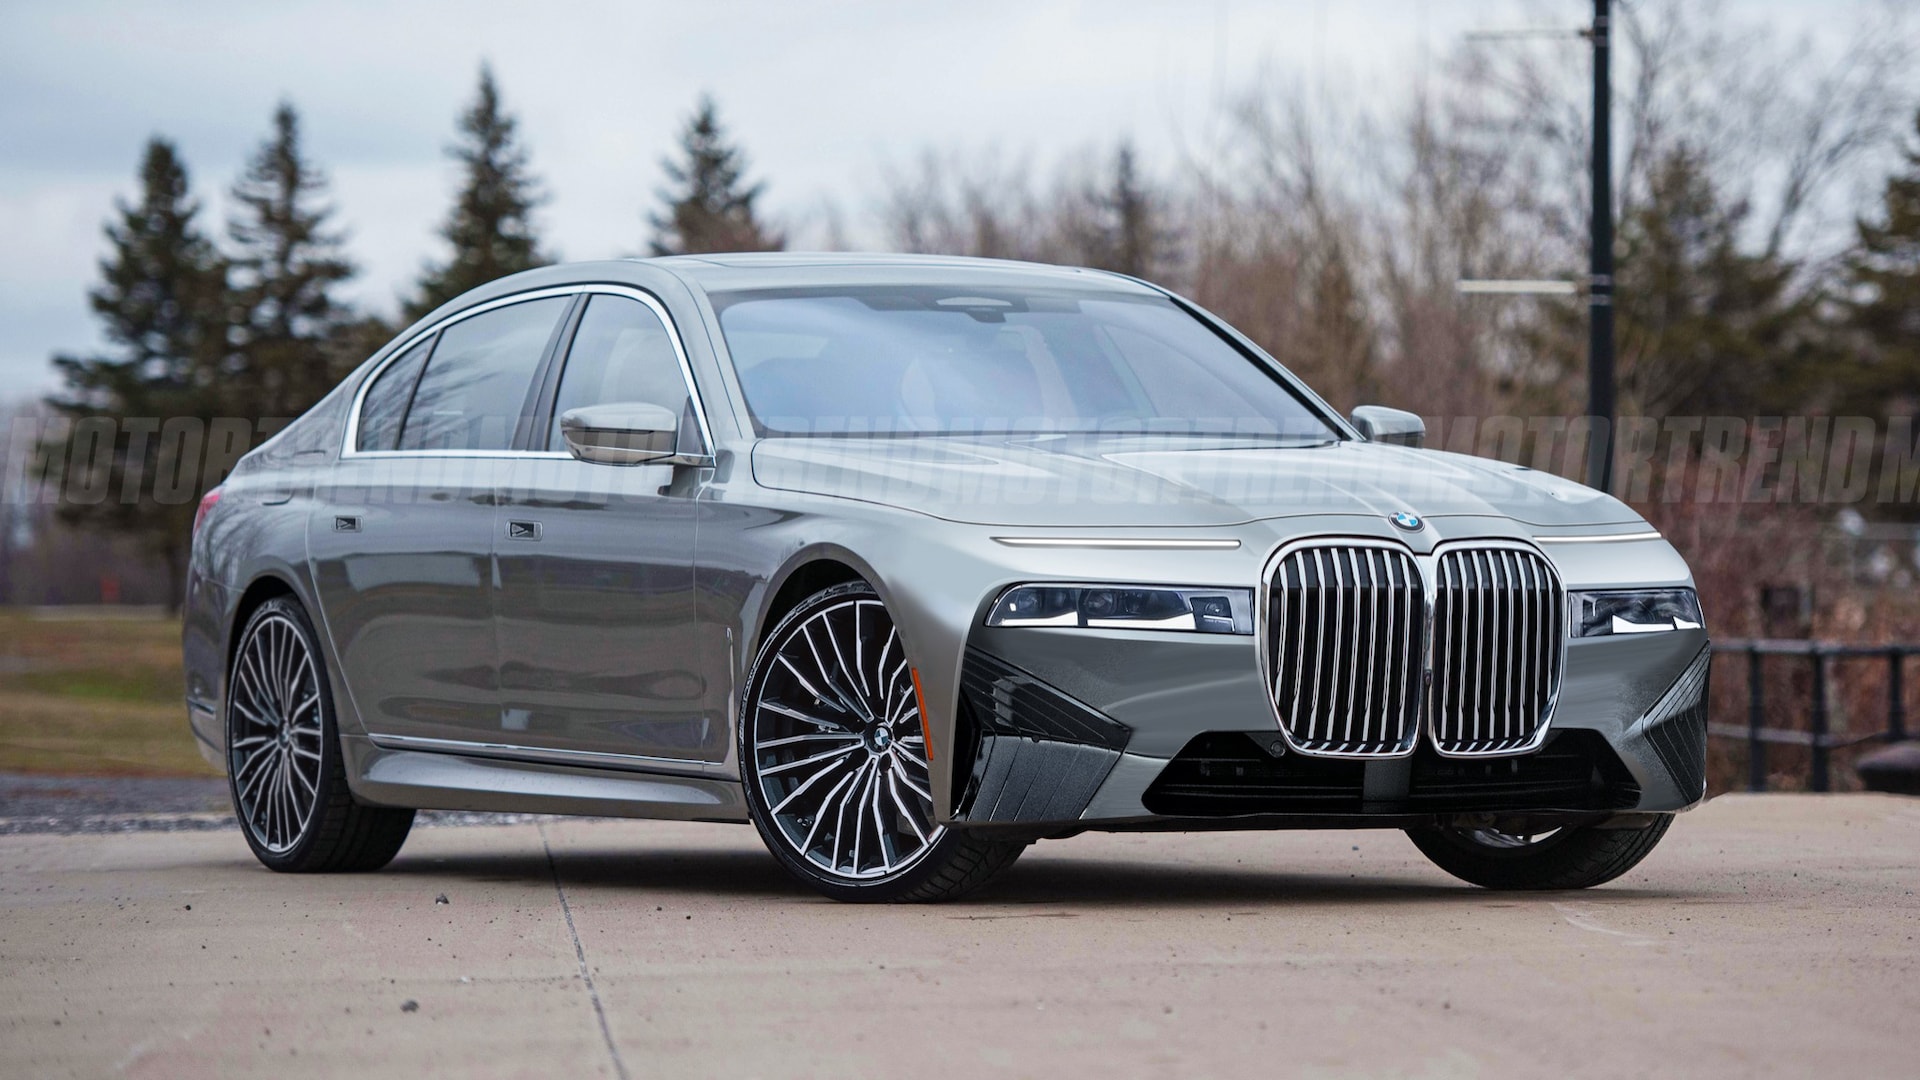 Future Cars: The 2023 BMW 7 Series Wants You to Love It